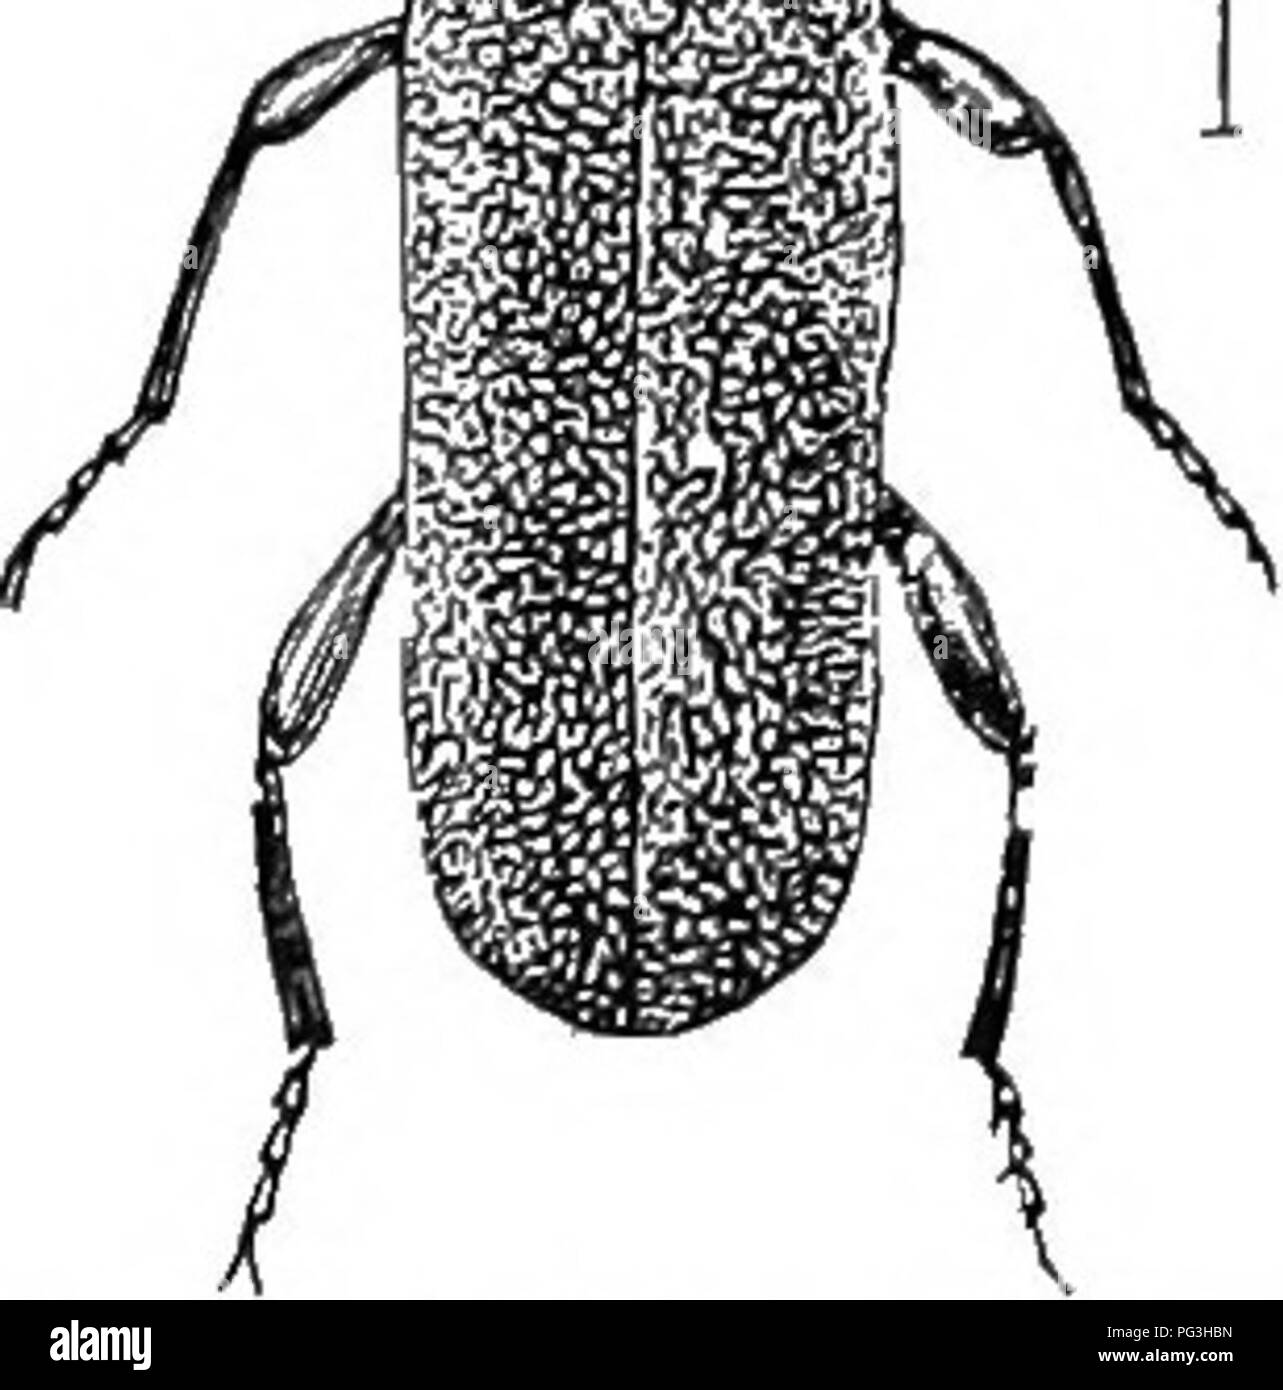 . An illustrated descriptive catalogue of the coleoptera or beetles (exclusive of the Rhynchophora) known to occur in Indiana : with bibliography and descriptions of new species . Beetles. THE LONG-HORNED WOOD-BORING BEETLES. 101.9 KEY TO INDIANA SPECIES OP CALLIDIUM. u. Thorax and elytra blue. h. Thorax finely punctured and impressed. &amp;6. Thorax deeply punctured, not impressed. aa. Thorax and elytra dull brownish-yellow. 1887. ANTENNATUM. JANTHINUM. JEWSVU.. Fig. 430. CoMidium. antennatum. was described from Texas C. cereatu Newm., length ISST (GOOS). Callidium antennatum Newm., Ent. Mag. Stock Photo